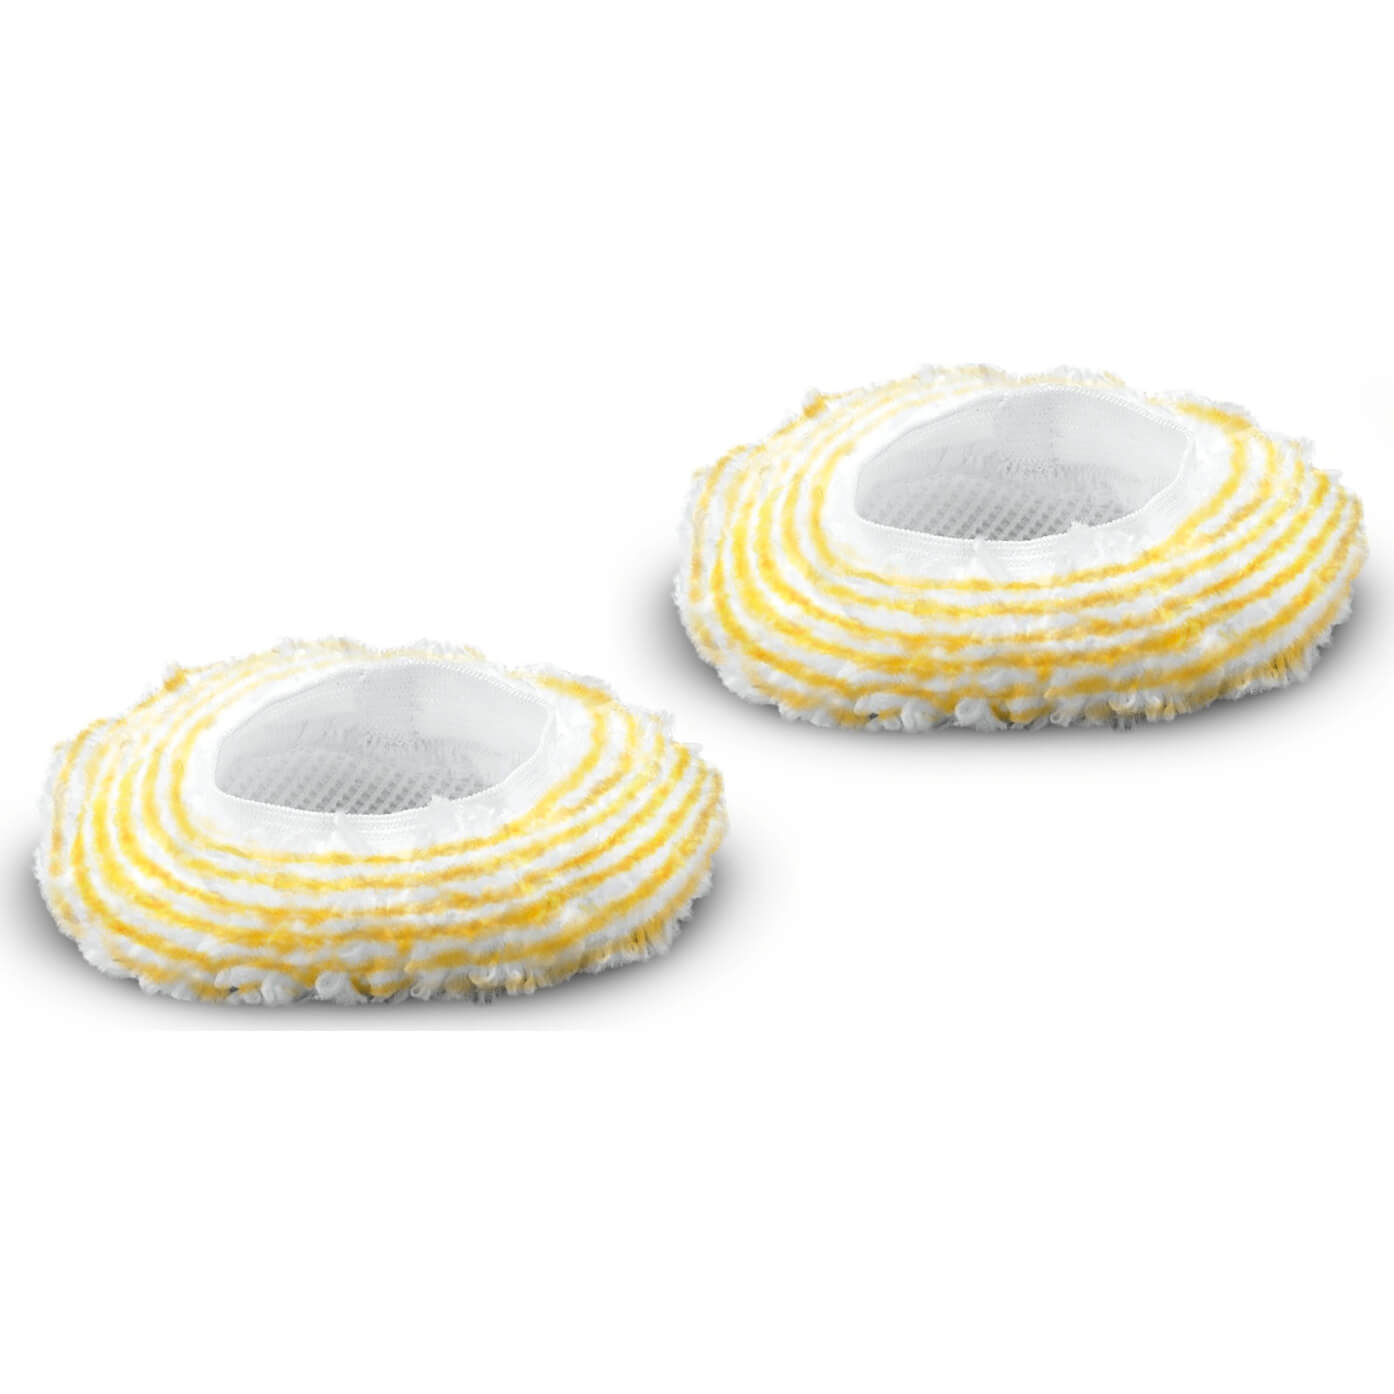 Karcher 2 Piece Big Round Brush Cover Set for SC EasyFix Steam Cleaners